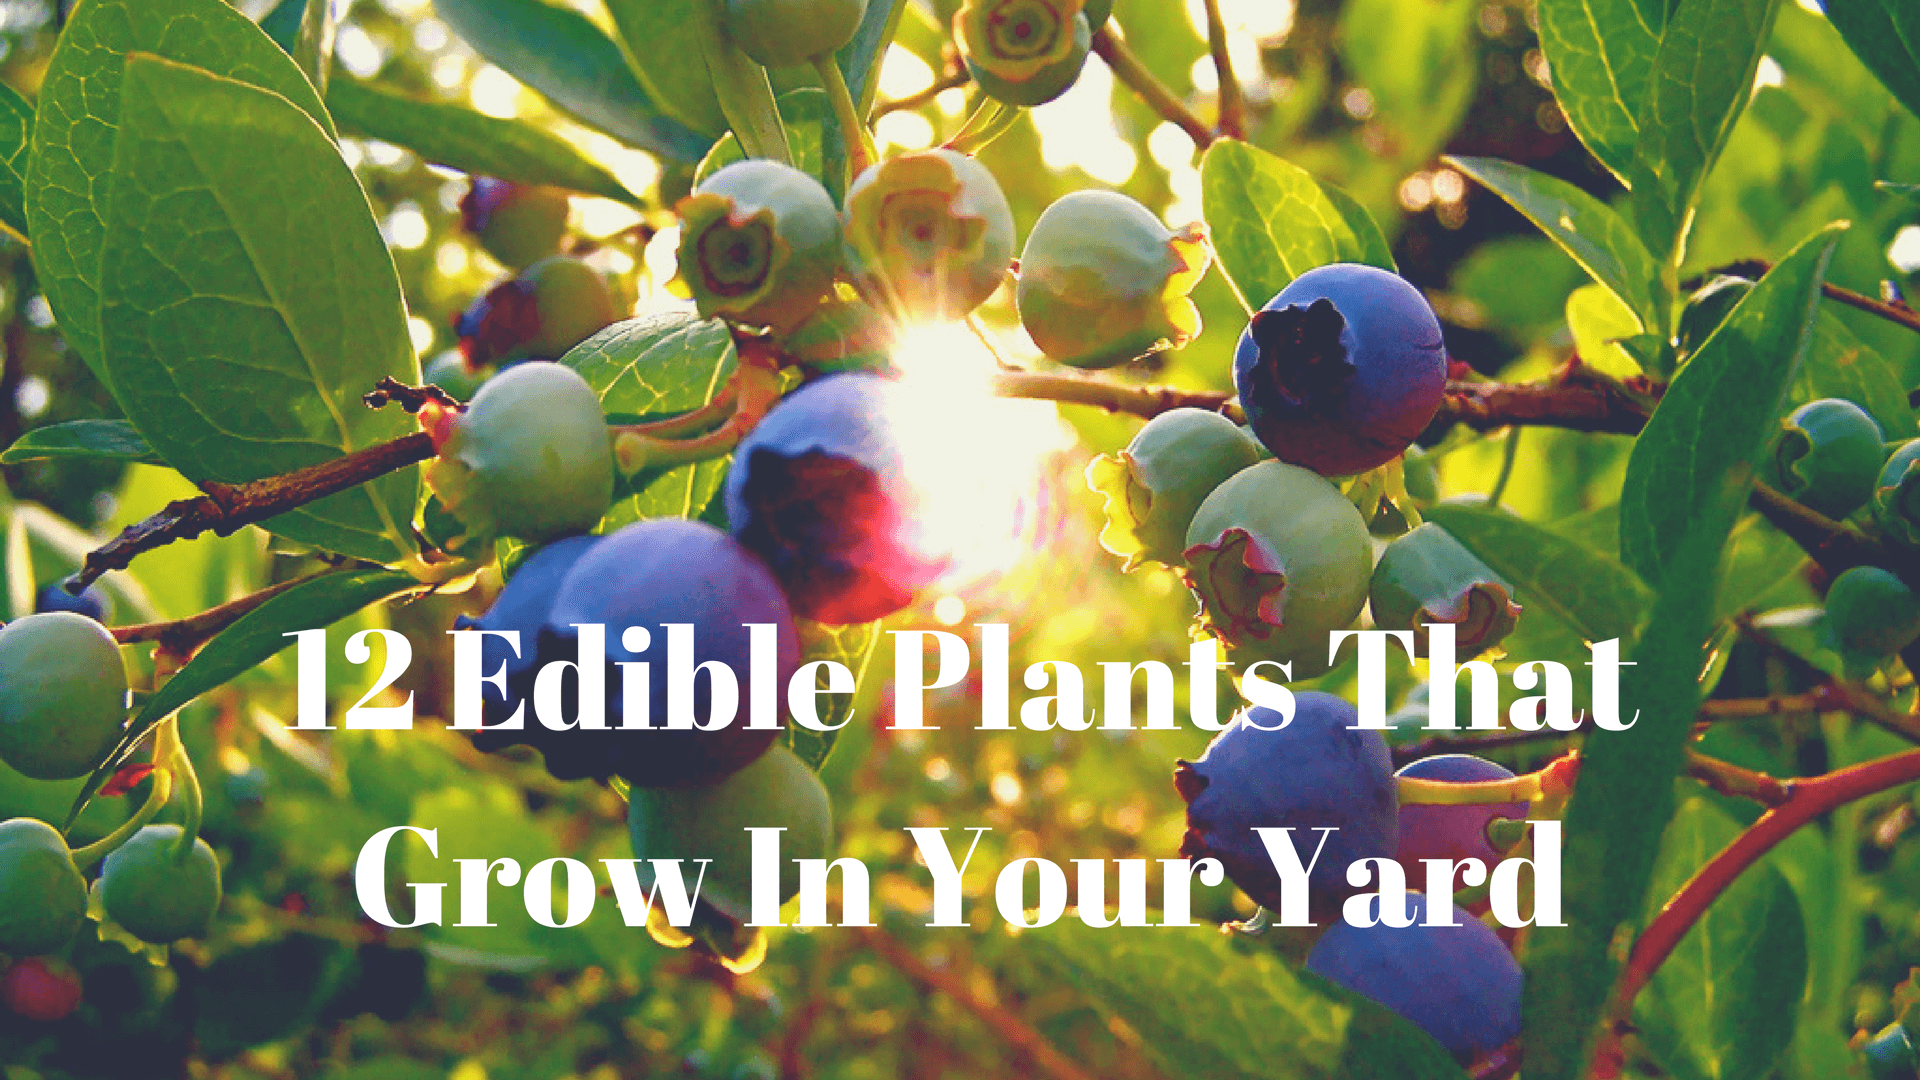 12 Edible Plants That Grow In Your Yard